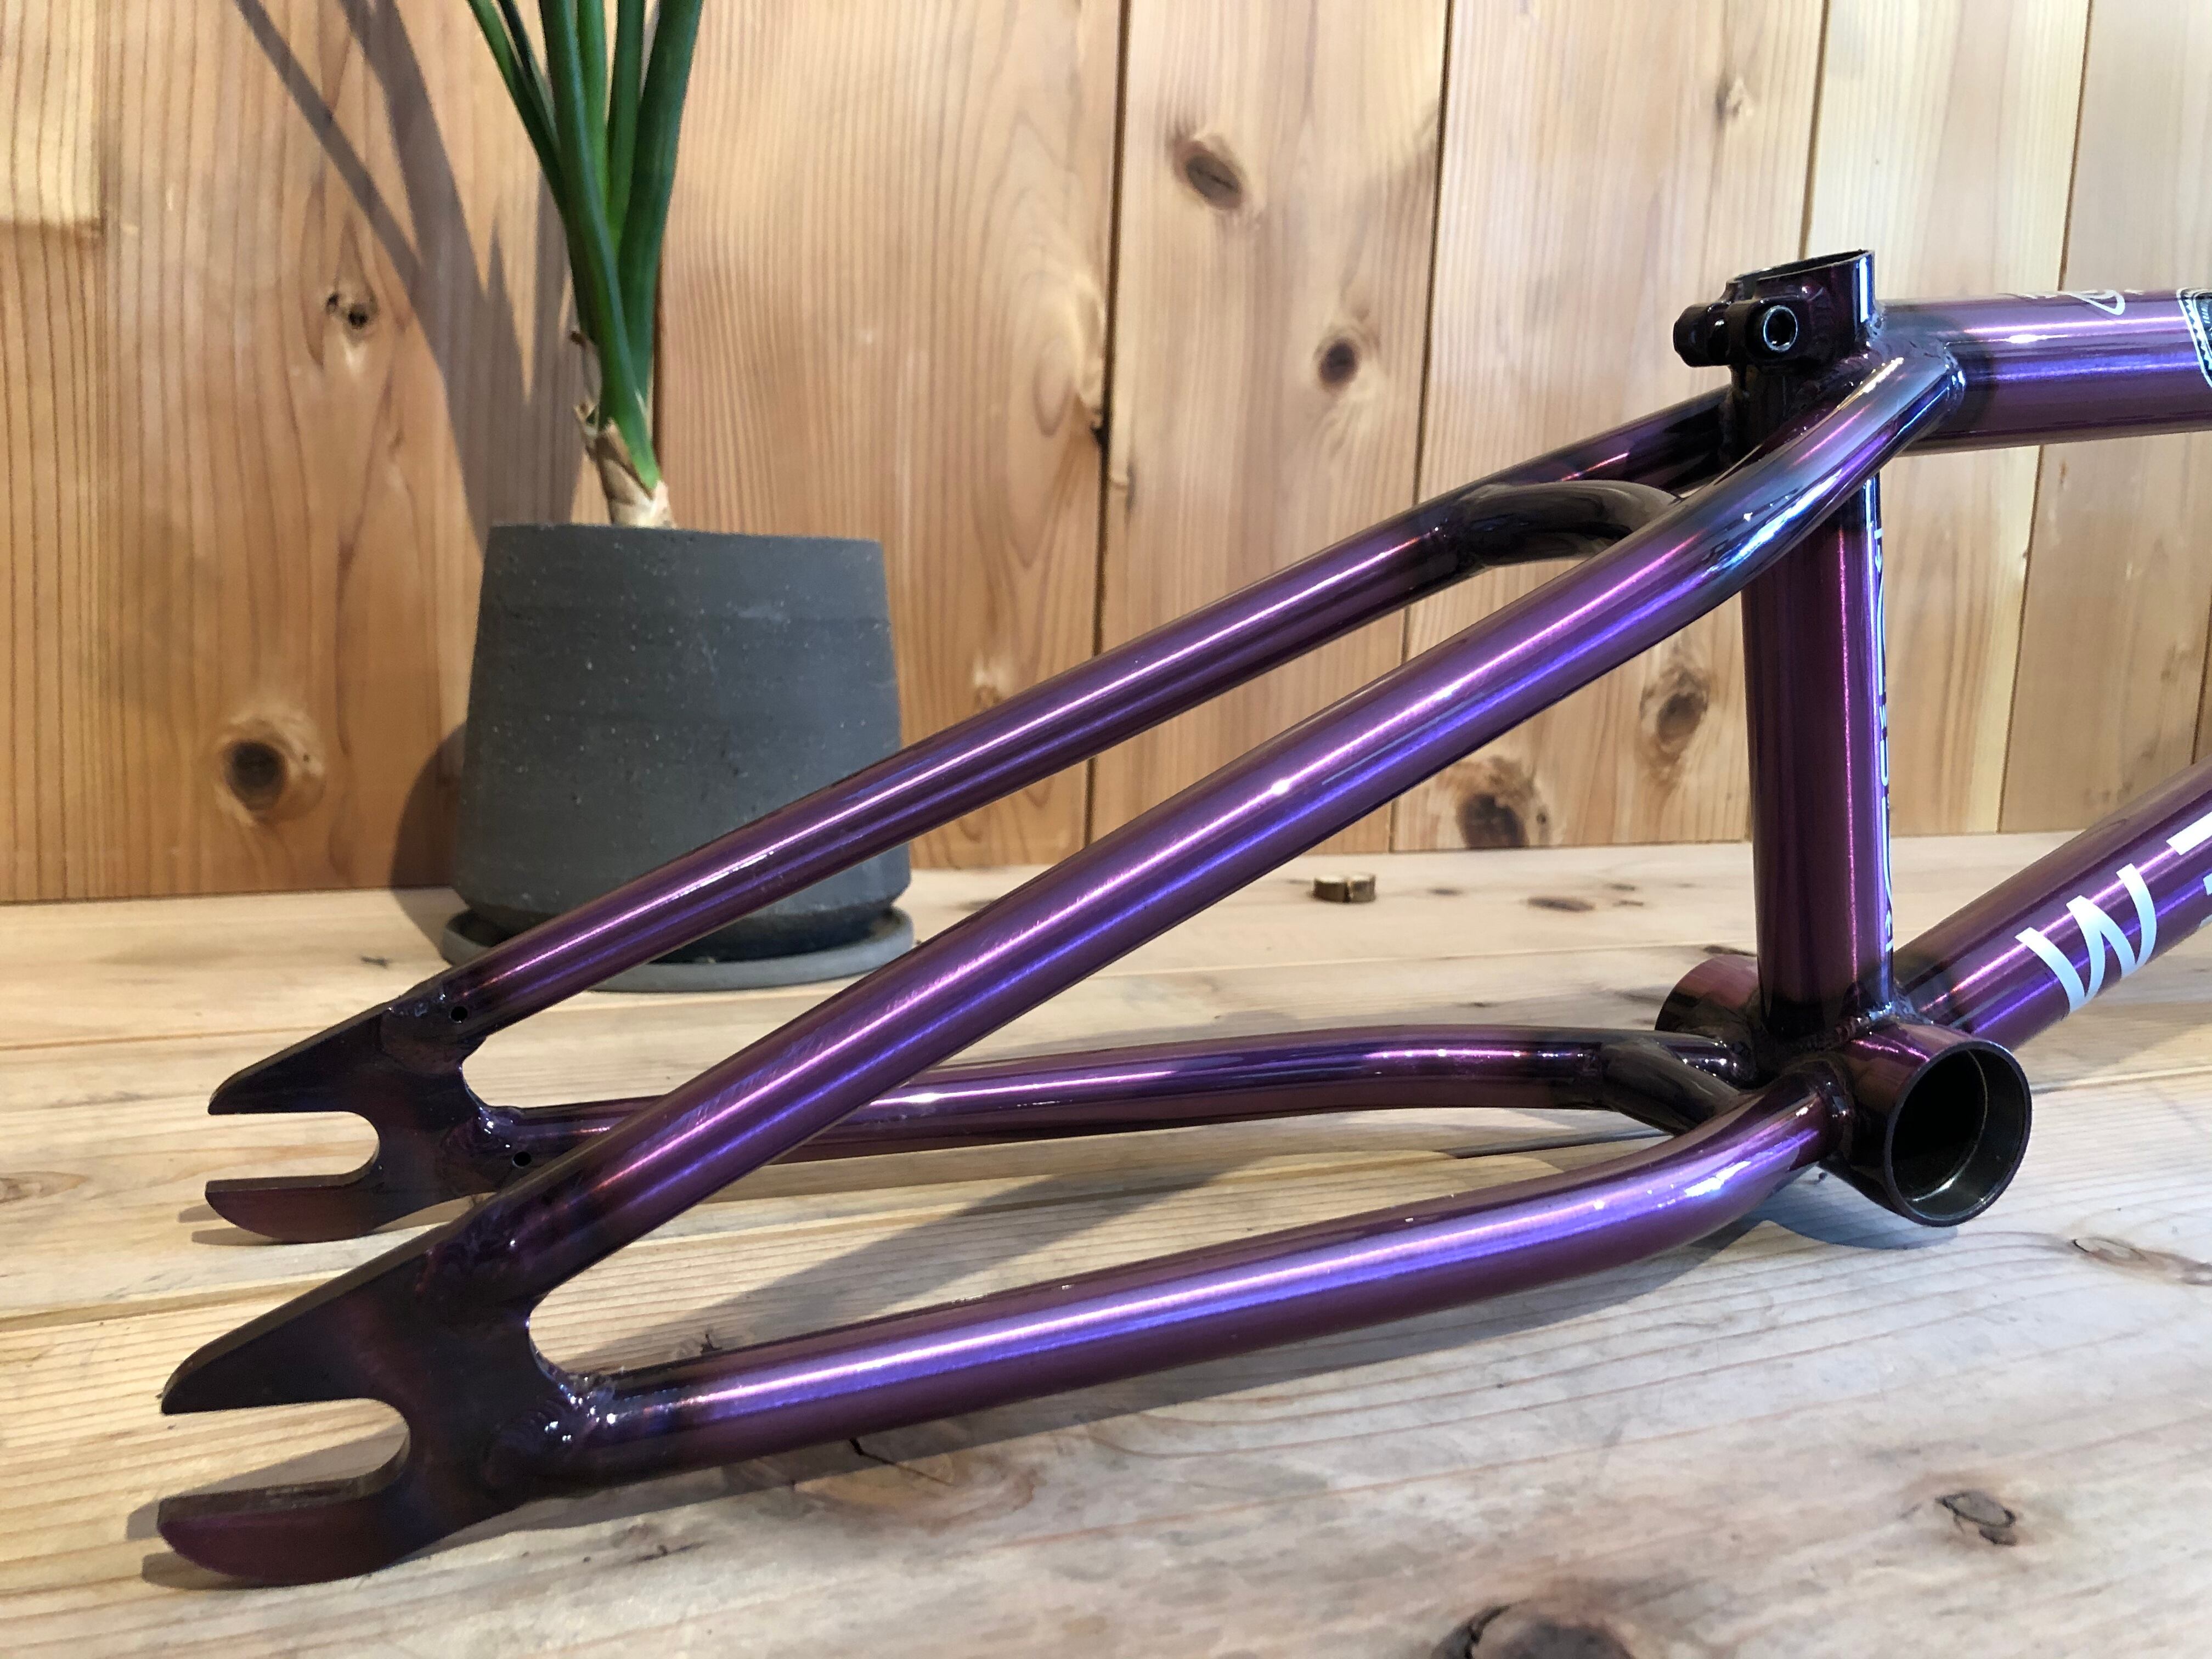 WETHEPEOPLE UTOPIA frame top19 BMX フレーム | MERSYS powered by BASE